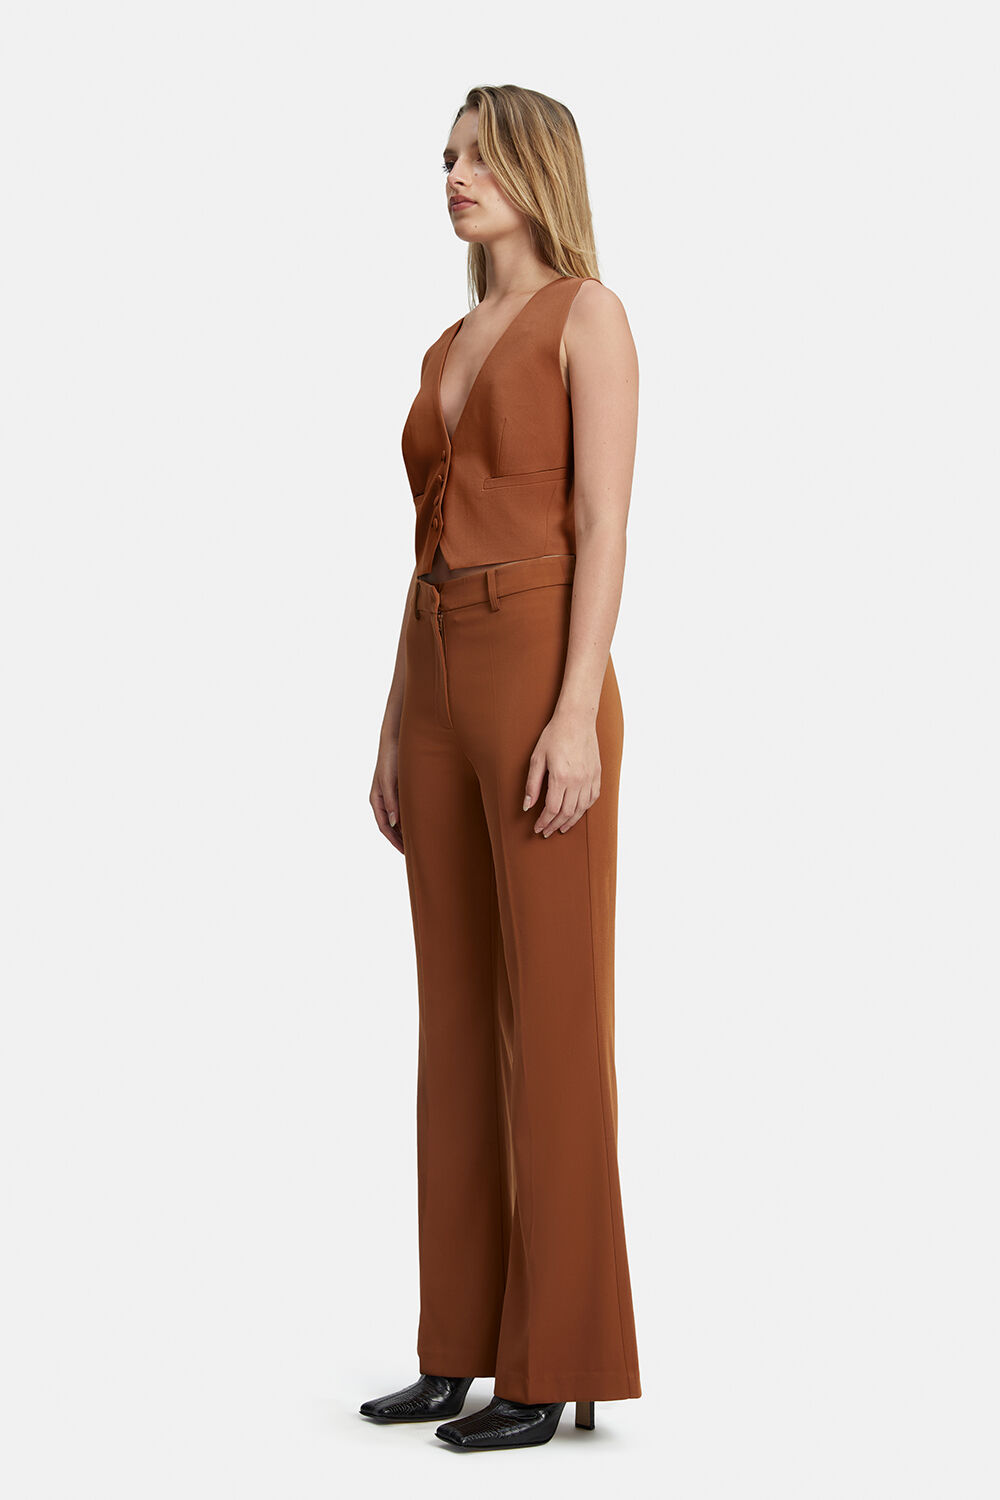 HALIFAX SLIM FLARE PANT in colour COPPER BROWN